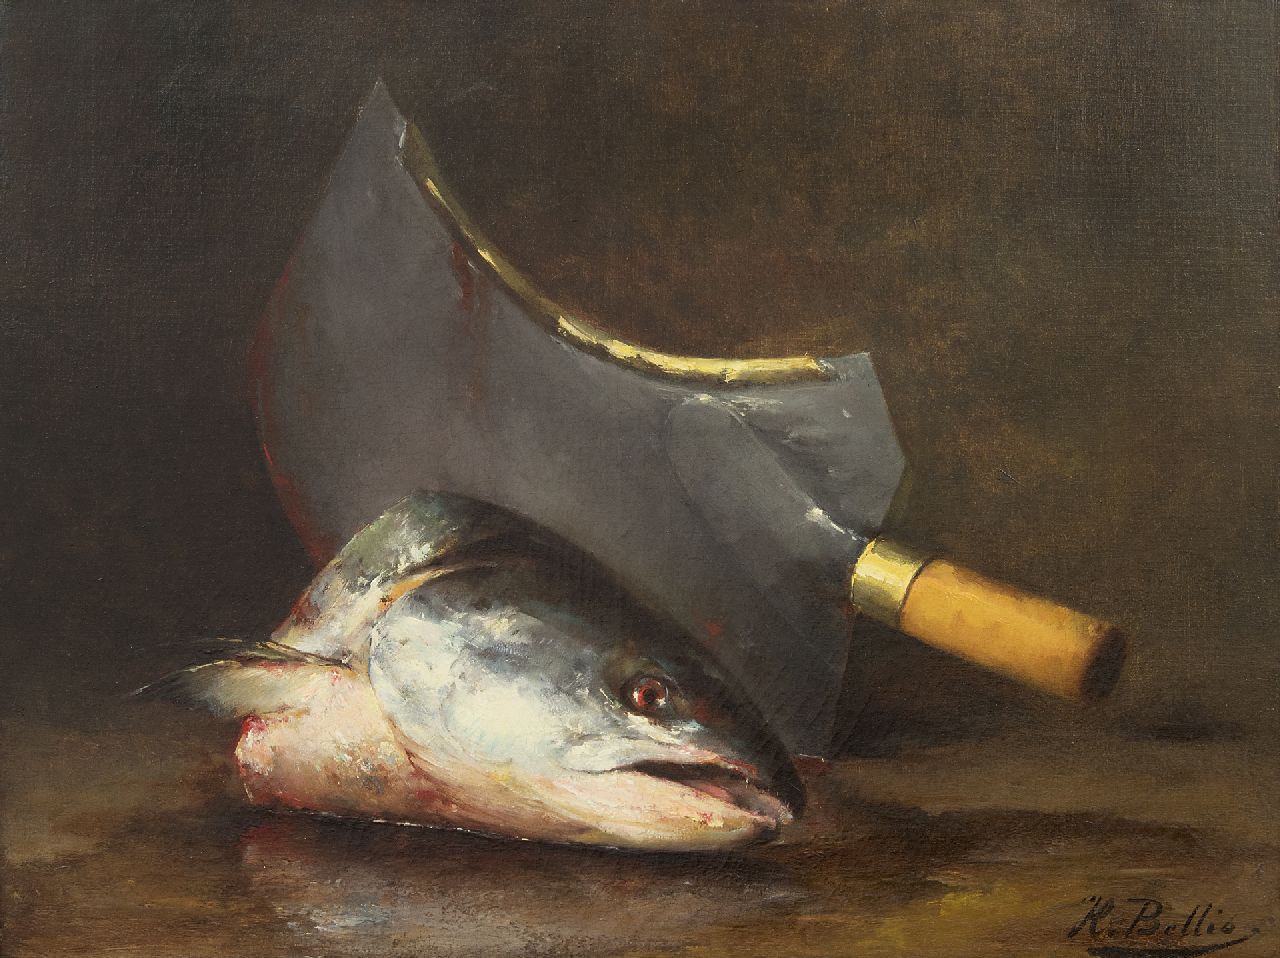 Bellis J.L.  | Josse-Lambert 'Hubert' Bellis | Paintings offered for sale | A still life with a fish head and cleaver, oil on canvas 47.2 x 63.0 cm, signed l.r.